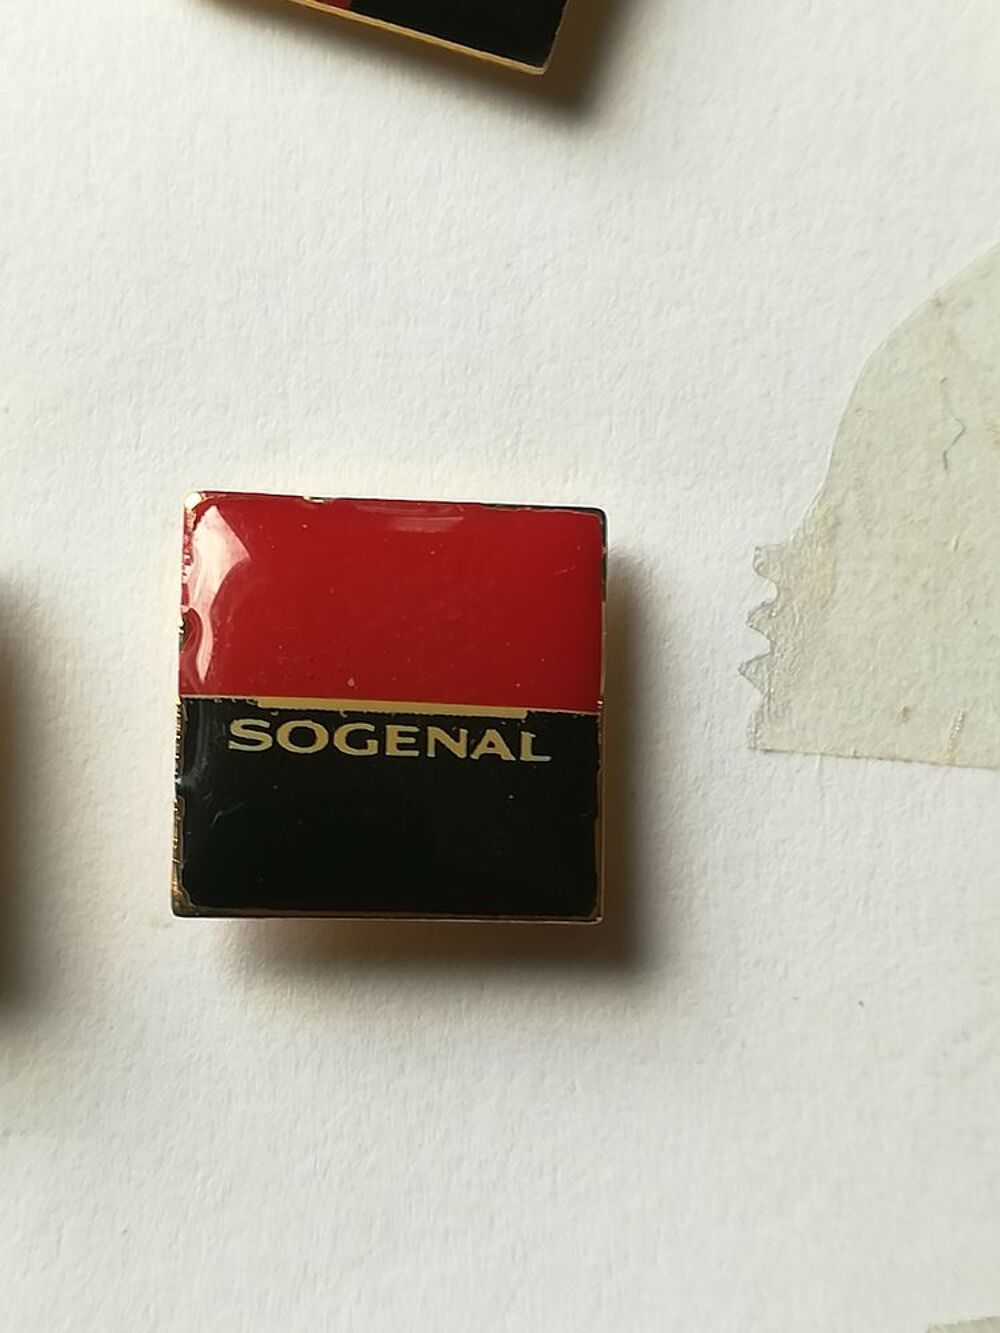 PIN ?S &quot; SOGENAL &quot; (pins)
